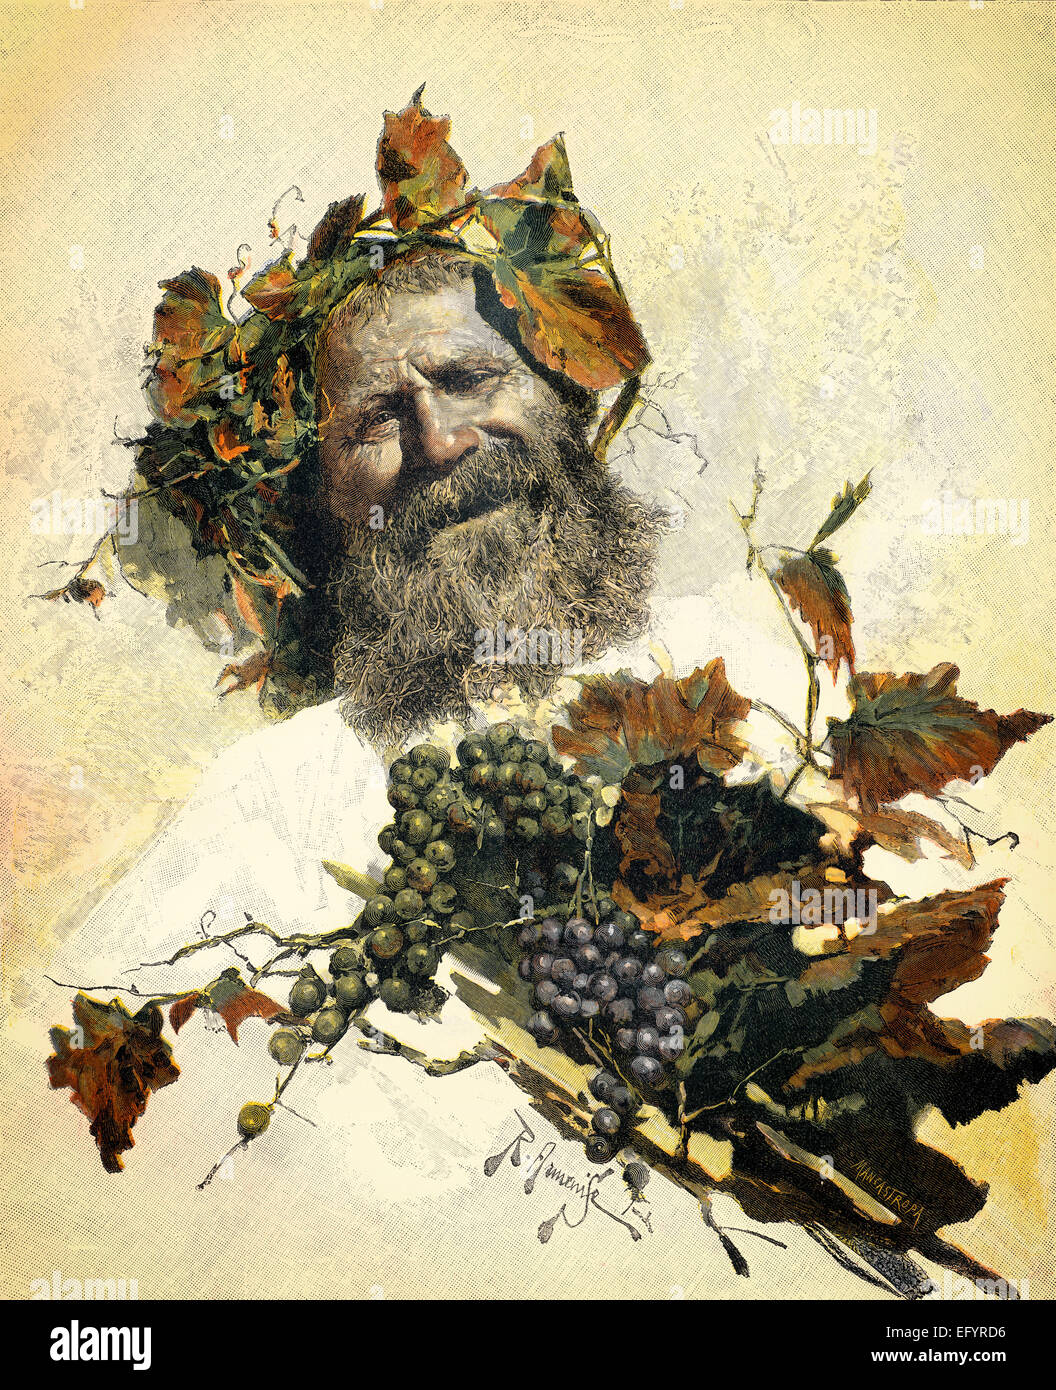 Bacchus, c. 1895, by Armenise, Stock Photo